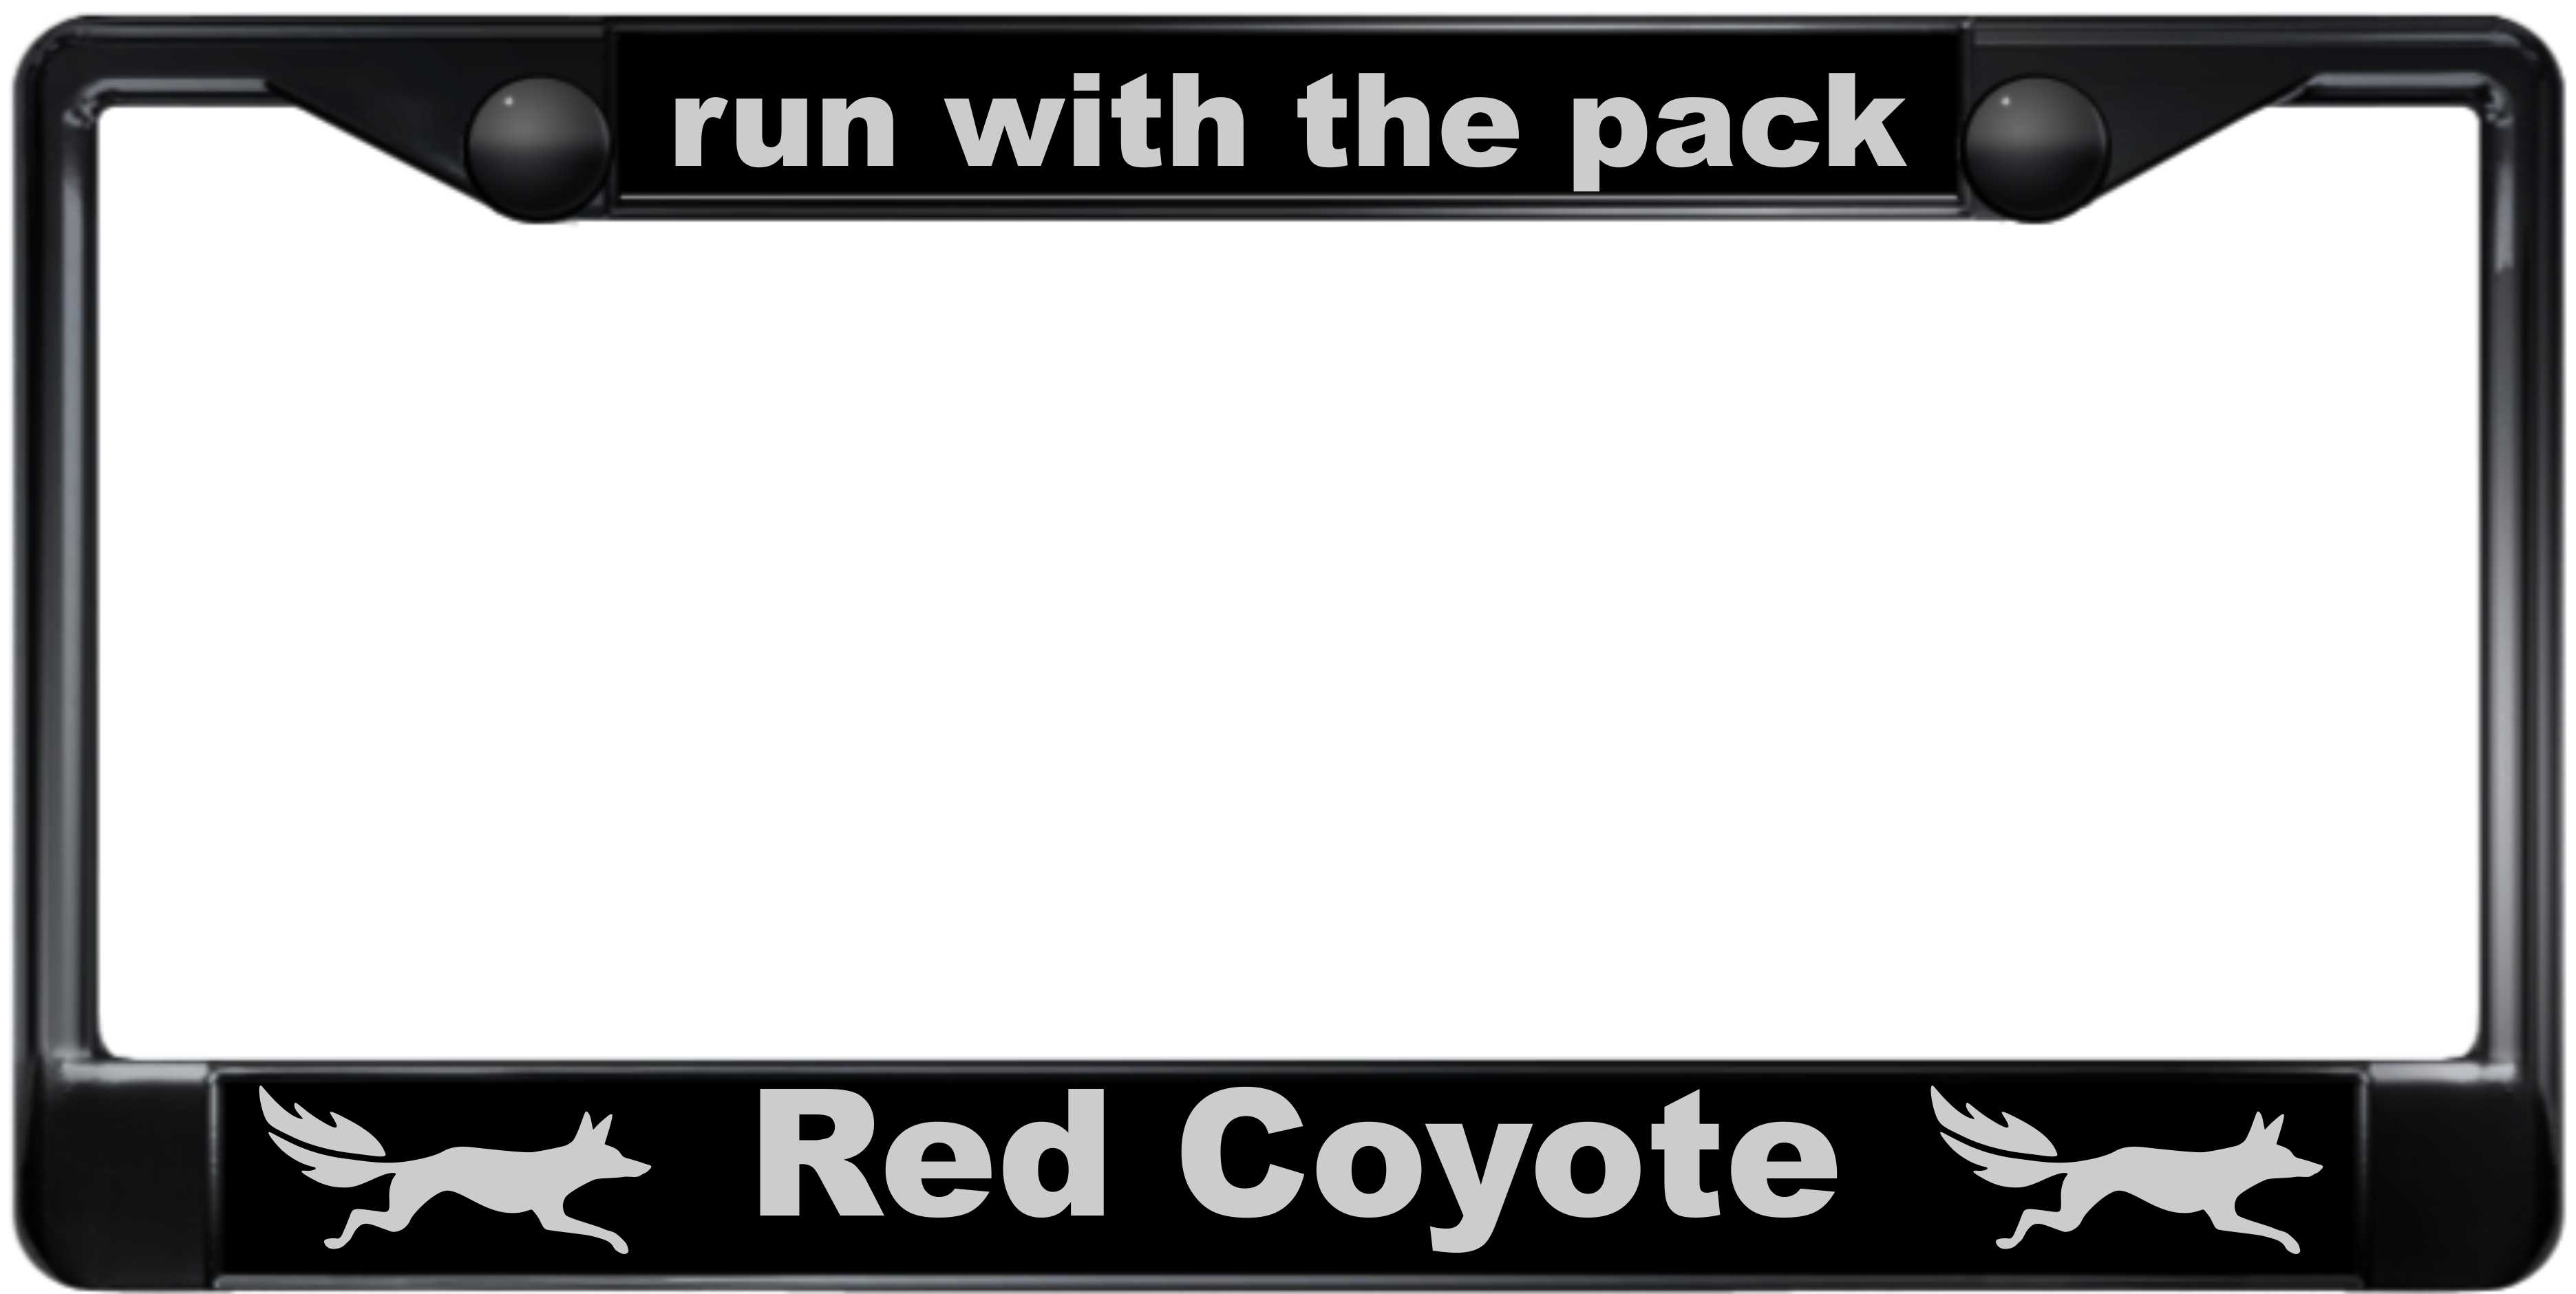 Red Coyote Car Standard license plate frame